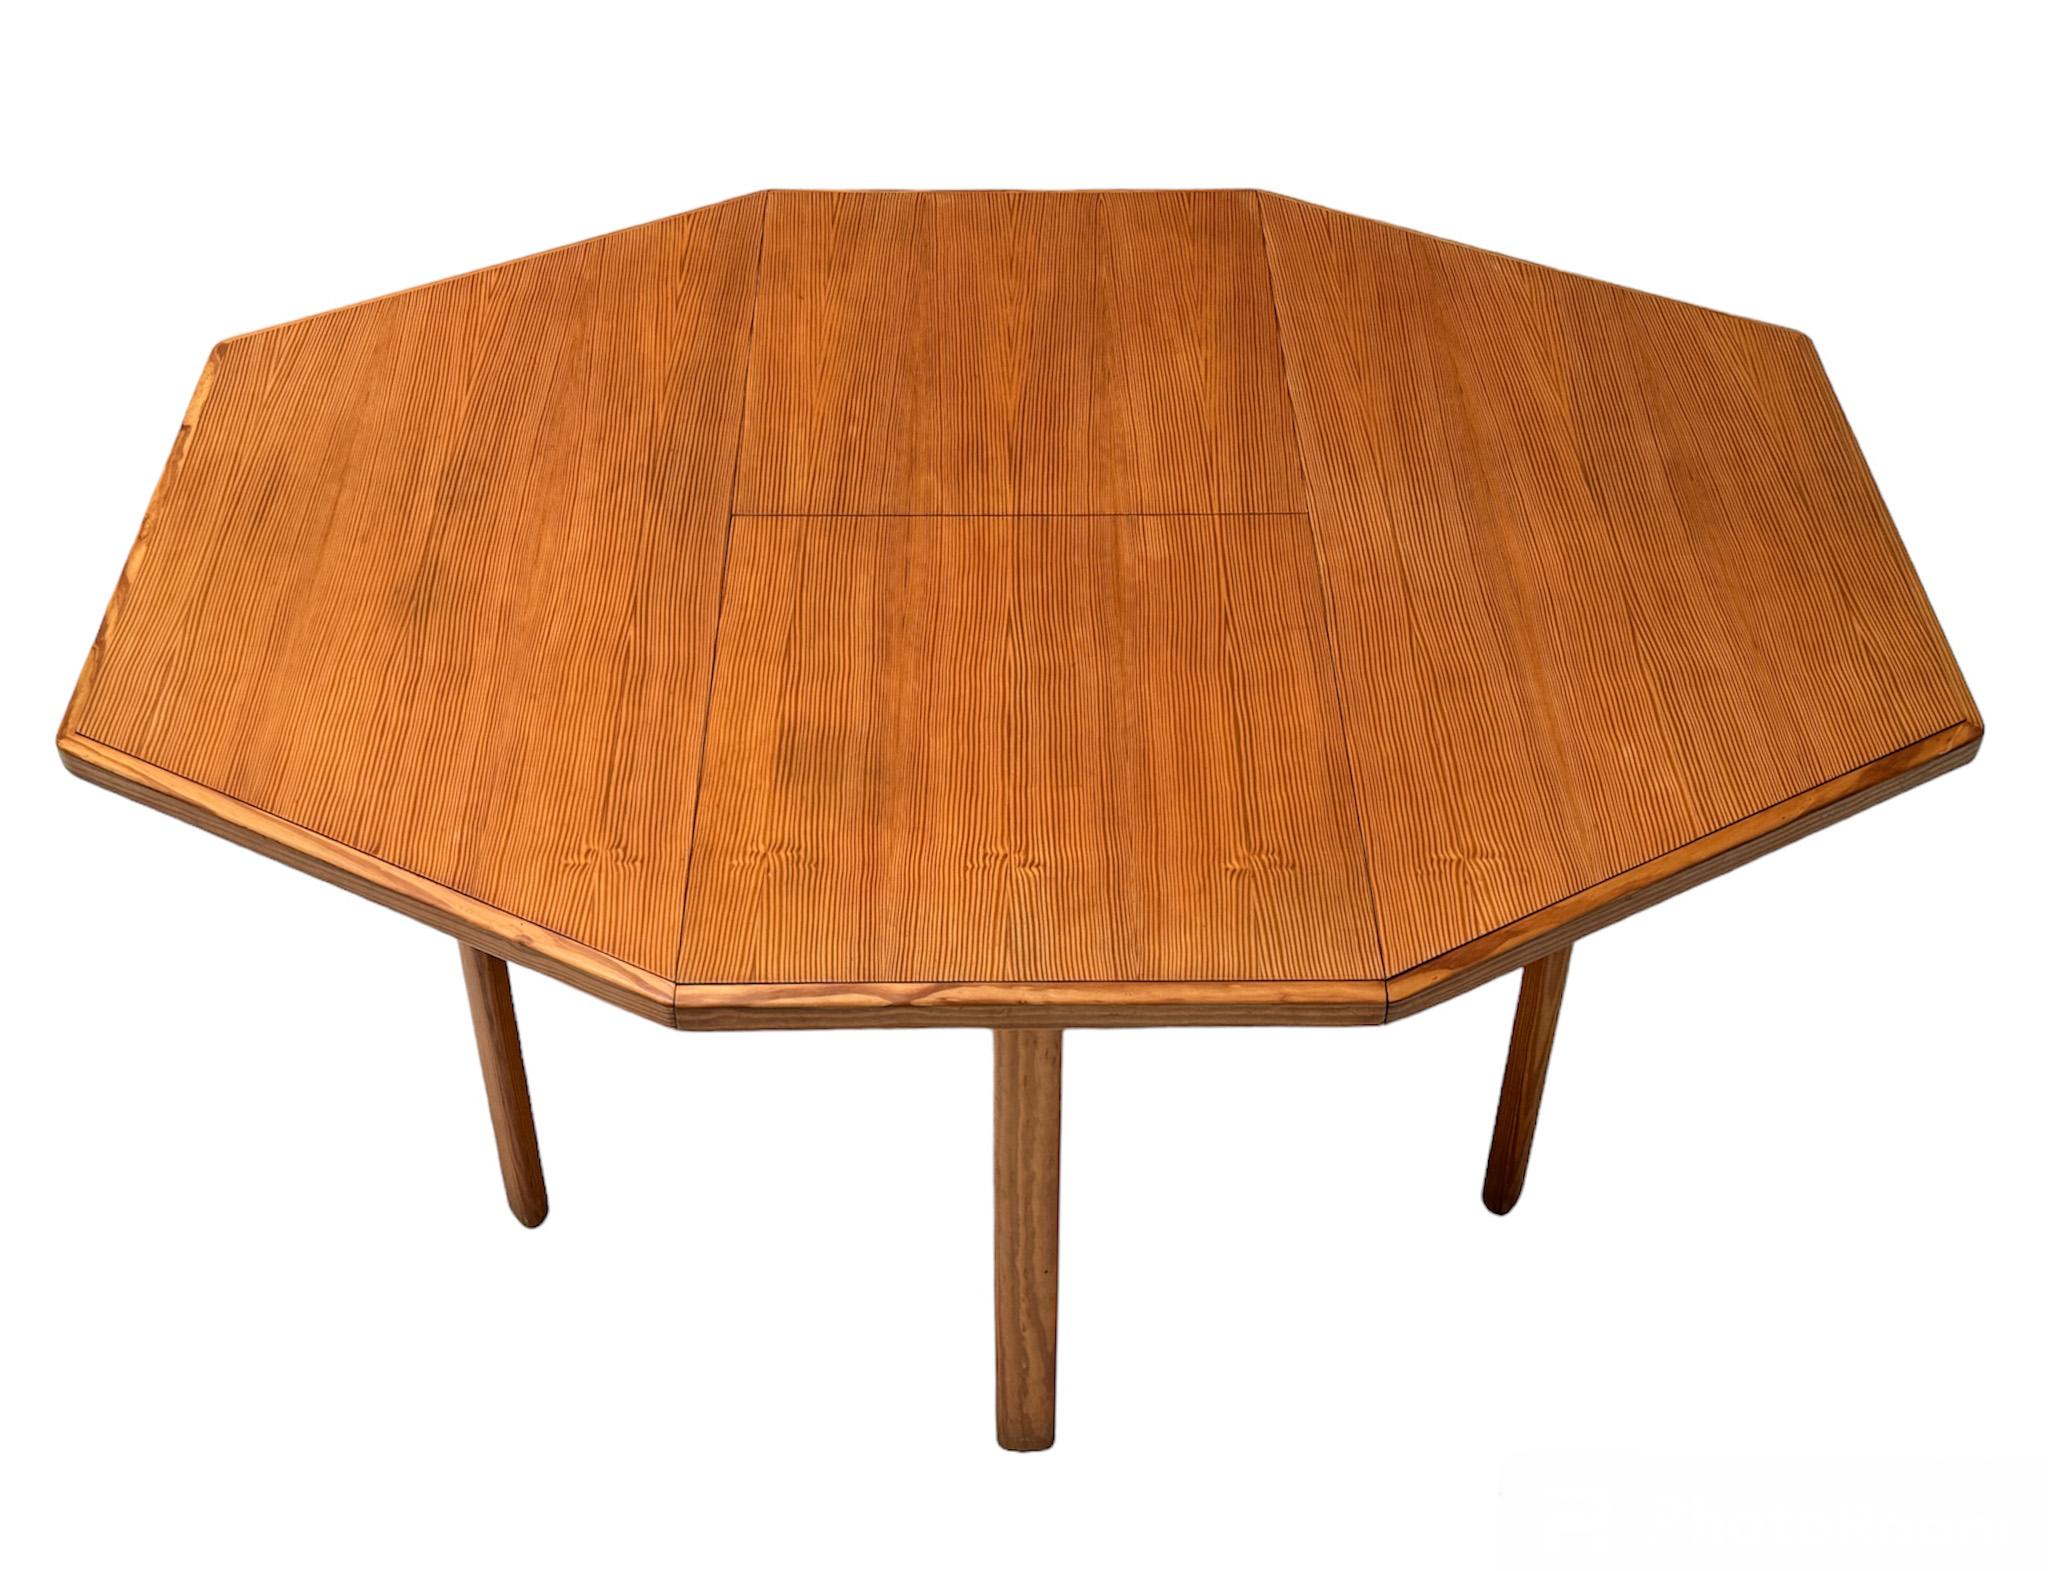 French Pine Mid-Century Modern Extendable Dining Room Table, 1970s For Sale 2